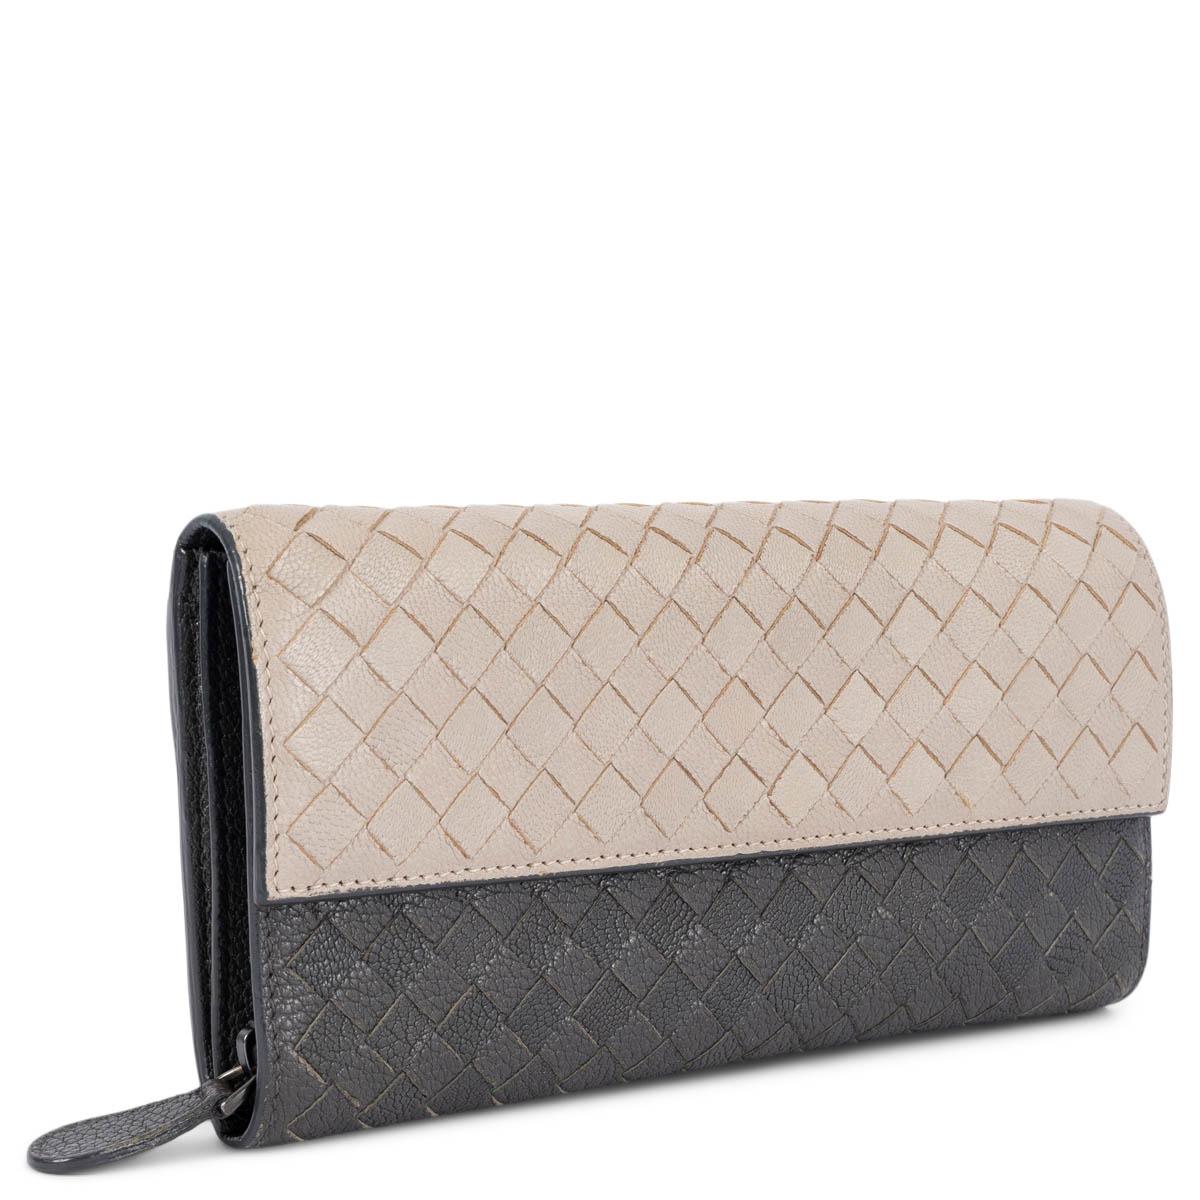 100% authentic Bottega Veneta two tone Intrecciato wallet in grey and ecru textured leather. Lined in grey leather with six credit card slots, two bill compartments and a big zipper pocket that is divided in two. Has been carried and is in excellent